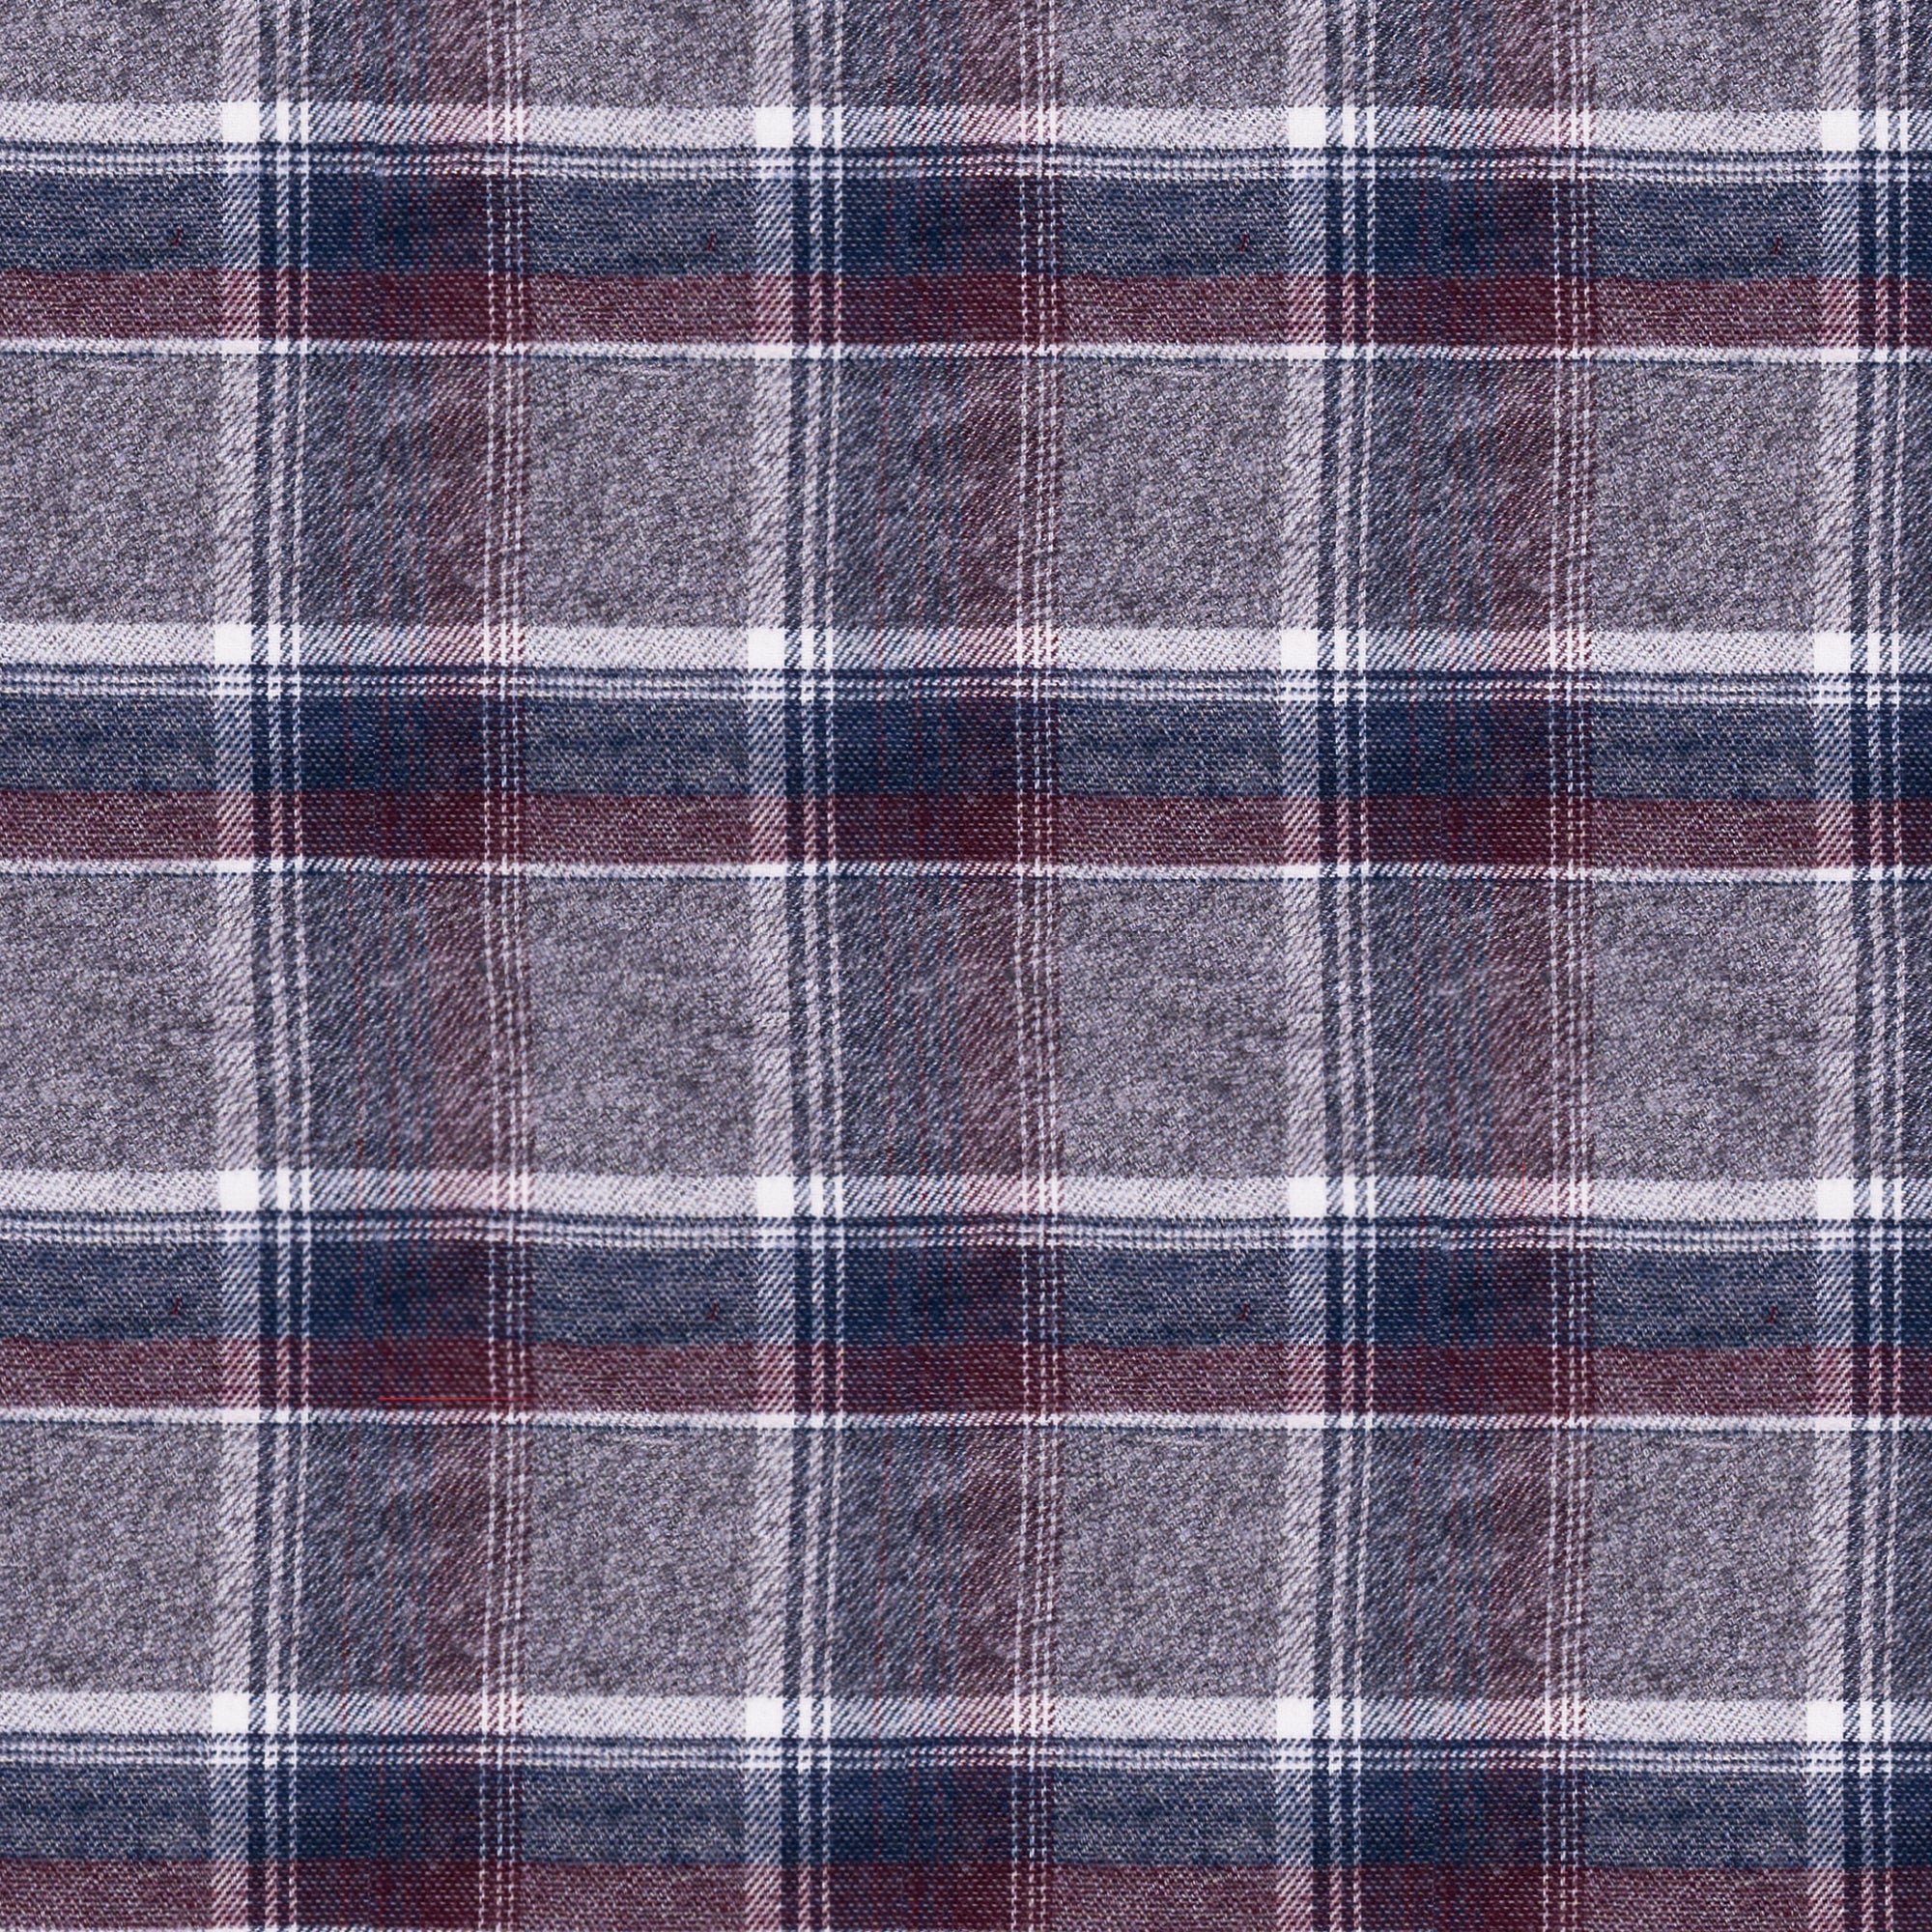 "PERFECT" FLANNEL